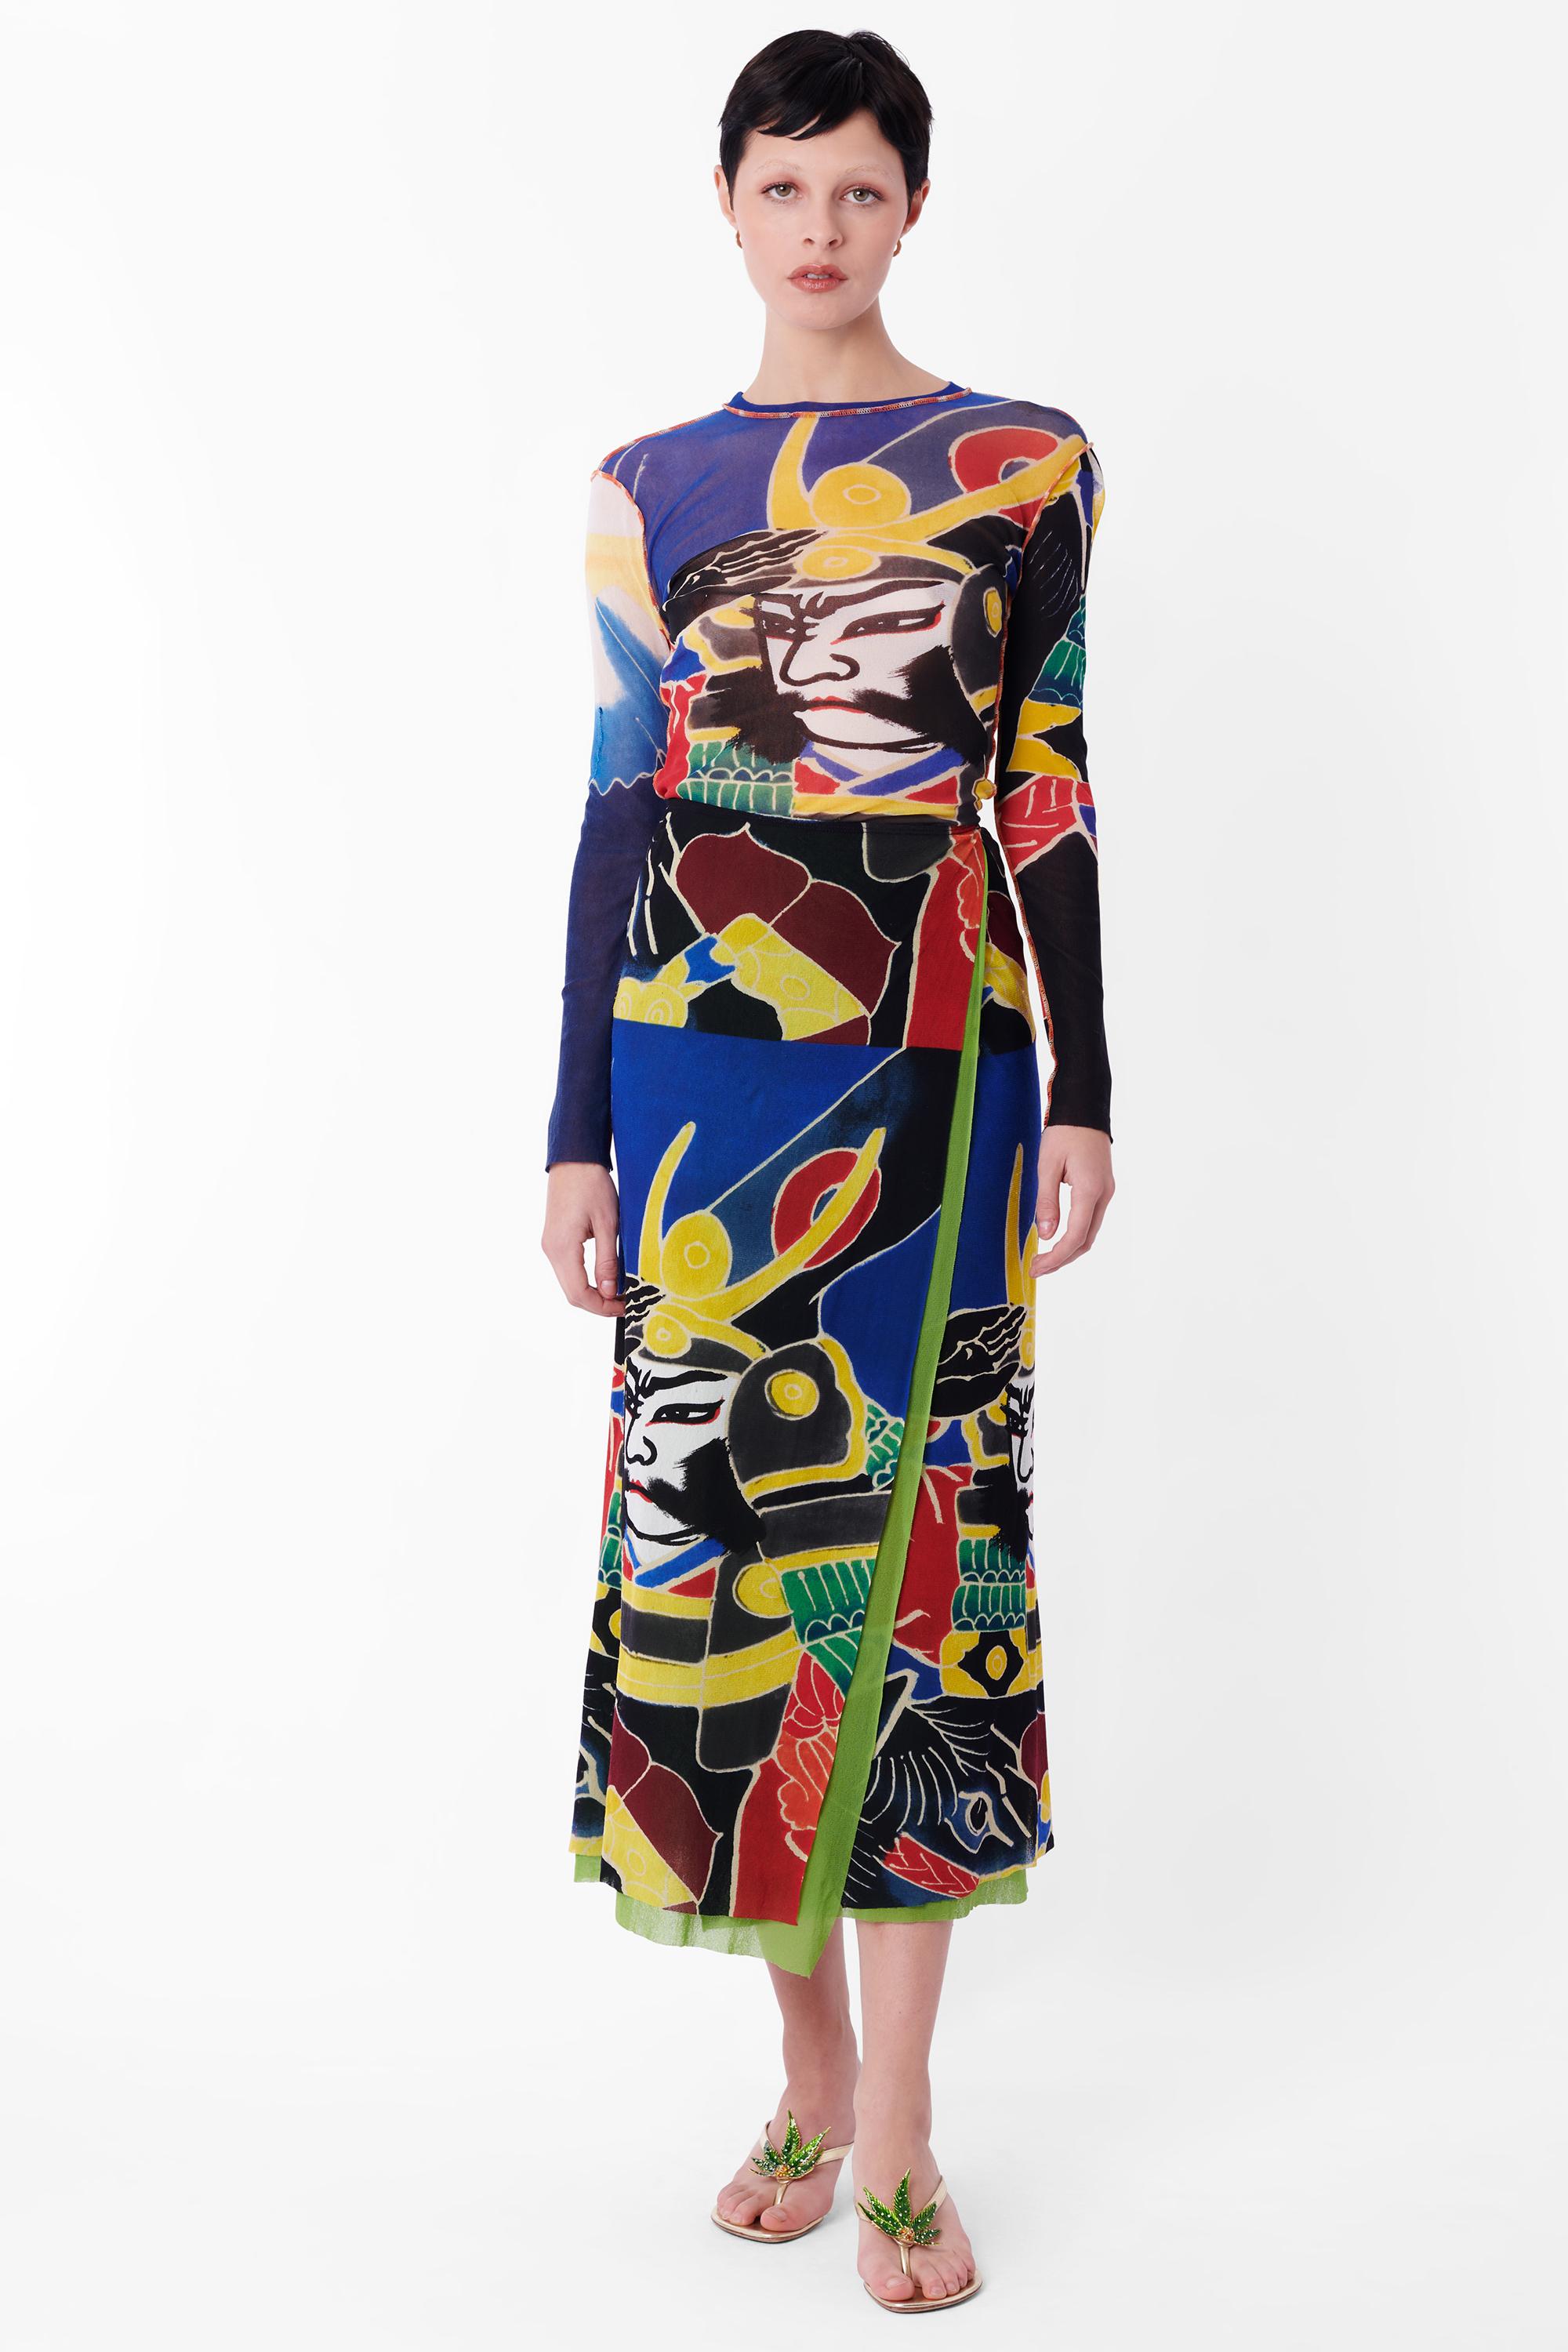 Vintage S/S 1999 Kabuki Print Mesh Co–ord In Excellent Condition For Sale In London, GB